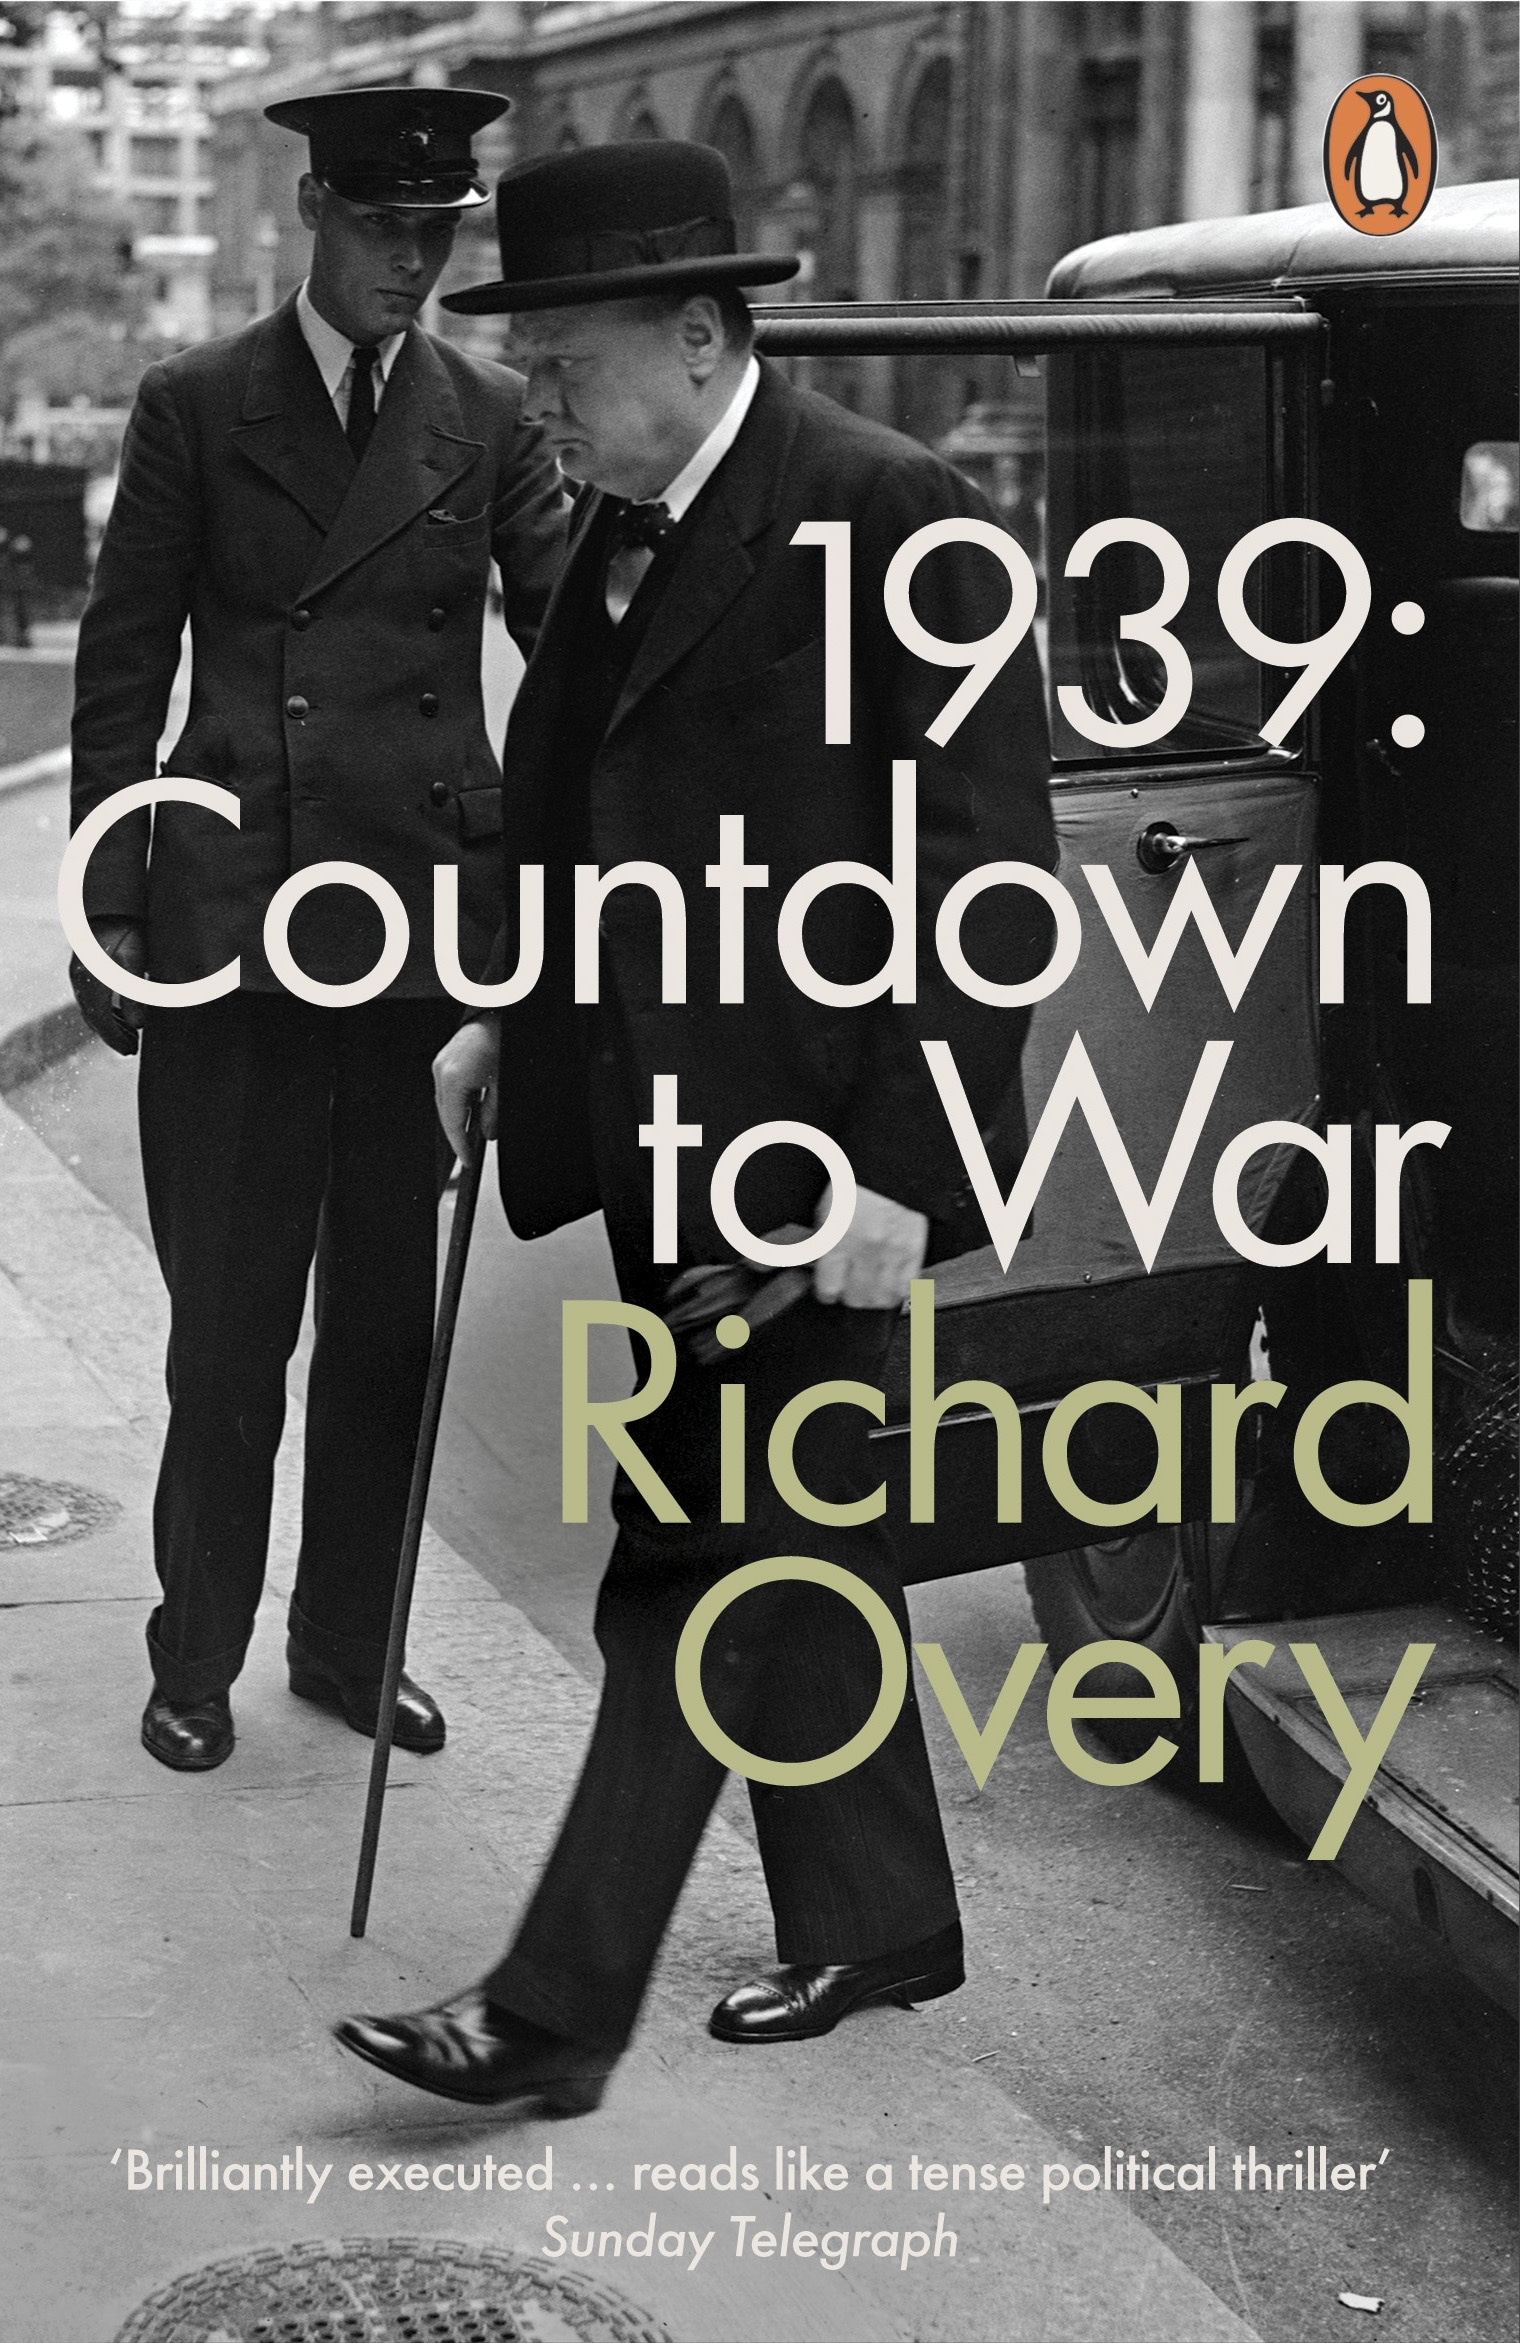 Book “1939” by Richard Overy — April 29, 2010